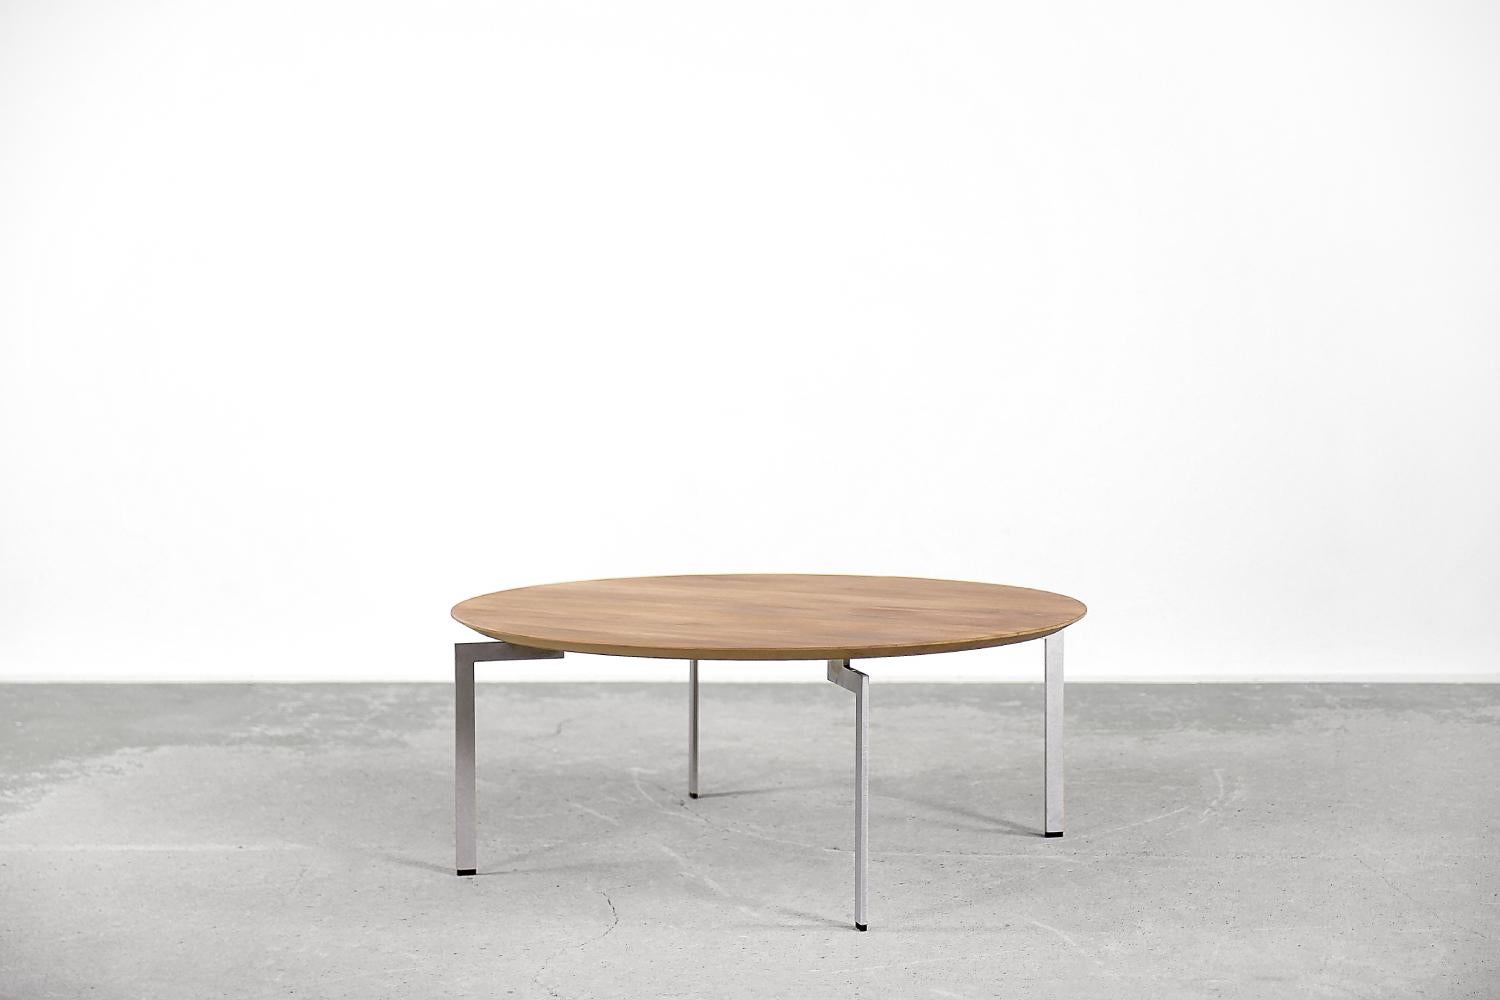 The Trippo round table was designed by Ulle Christiansson for the Swedish manufactory Karl Andersson & Söner at the end of the 20th century. It is finished with wood. It has slender solid steel legs with a matte finish. The Trippo table series is